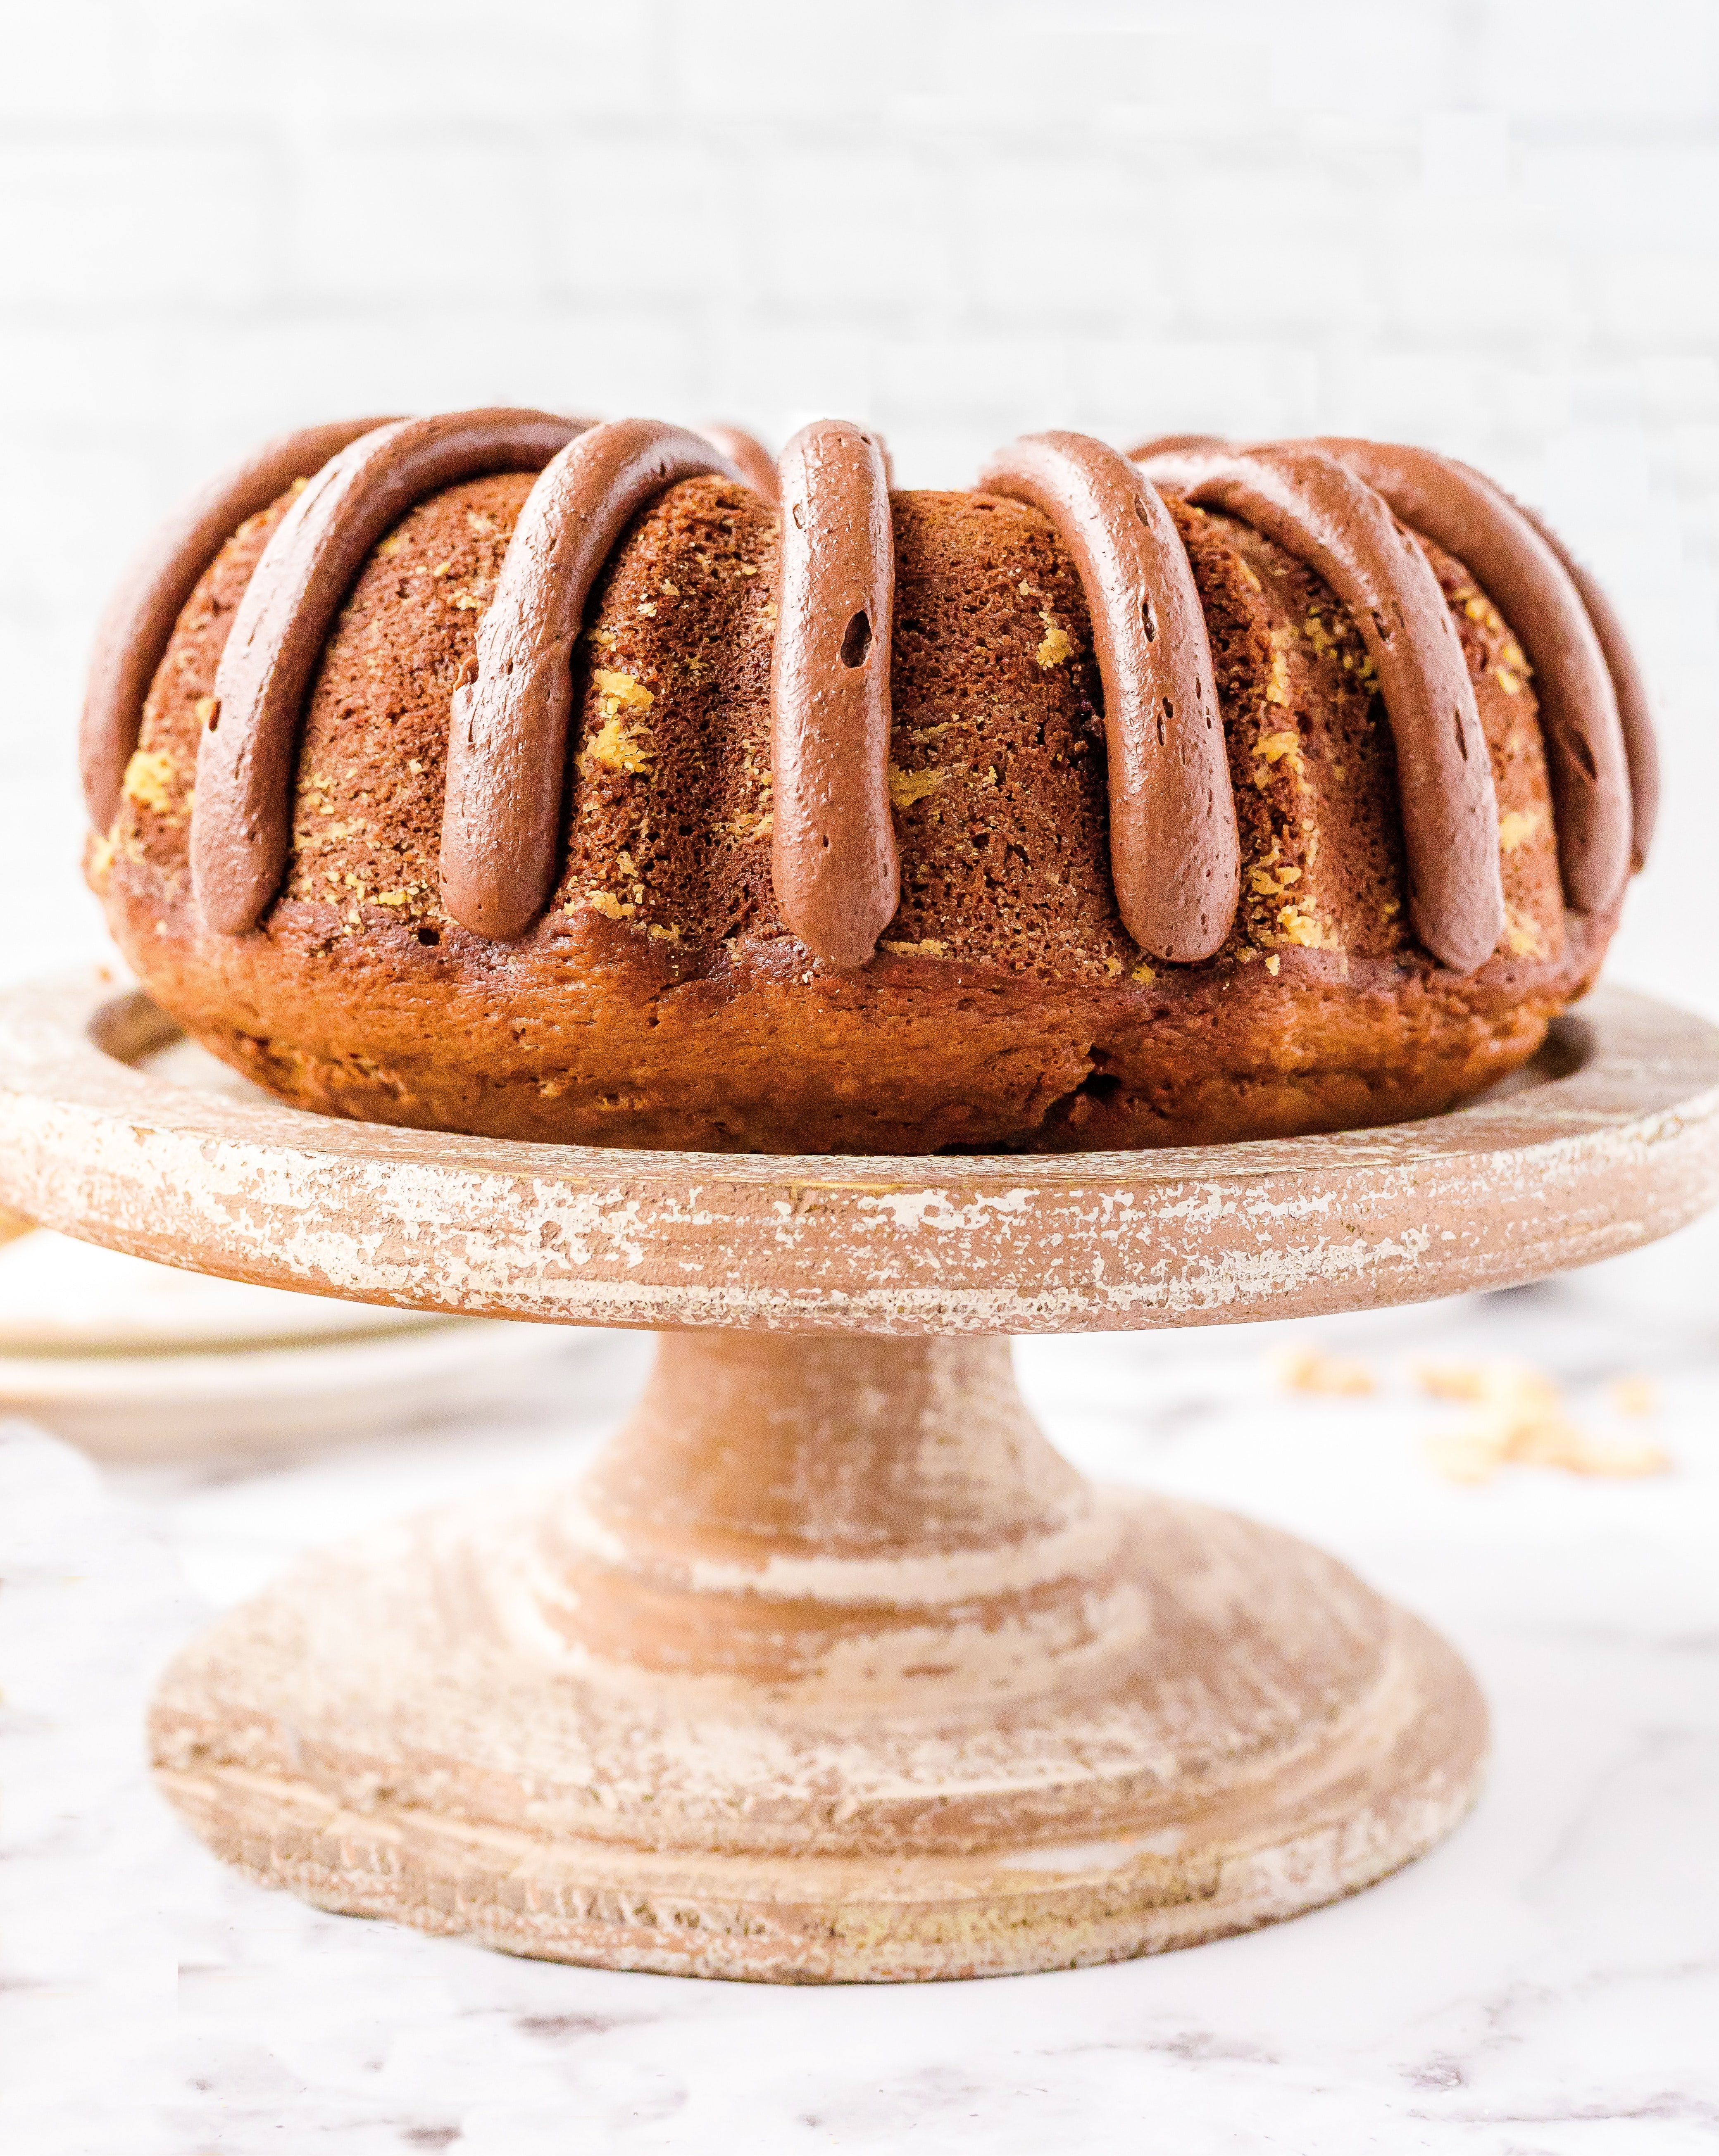 peanut butter banana bundt cake with chocolate frosting